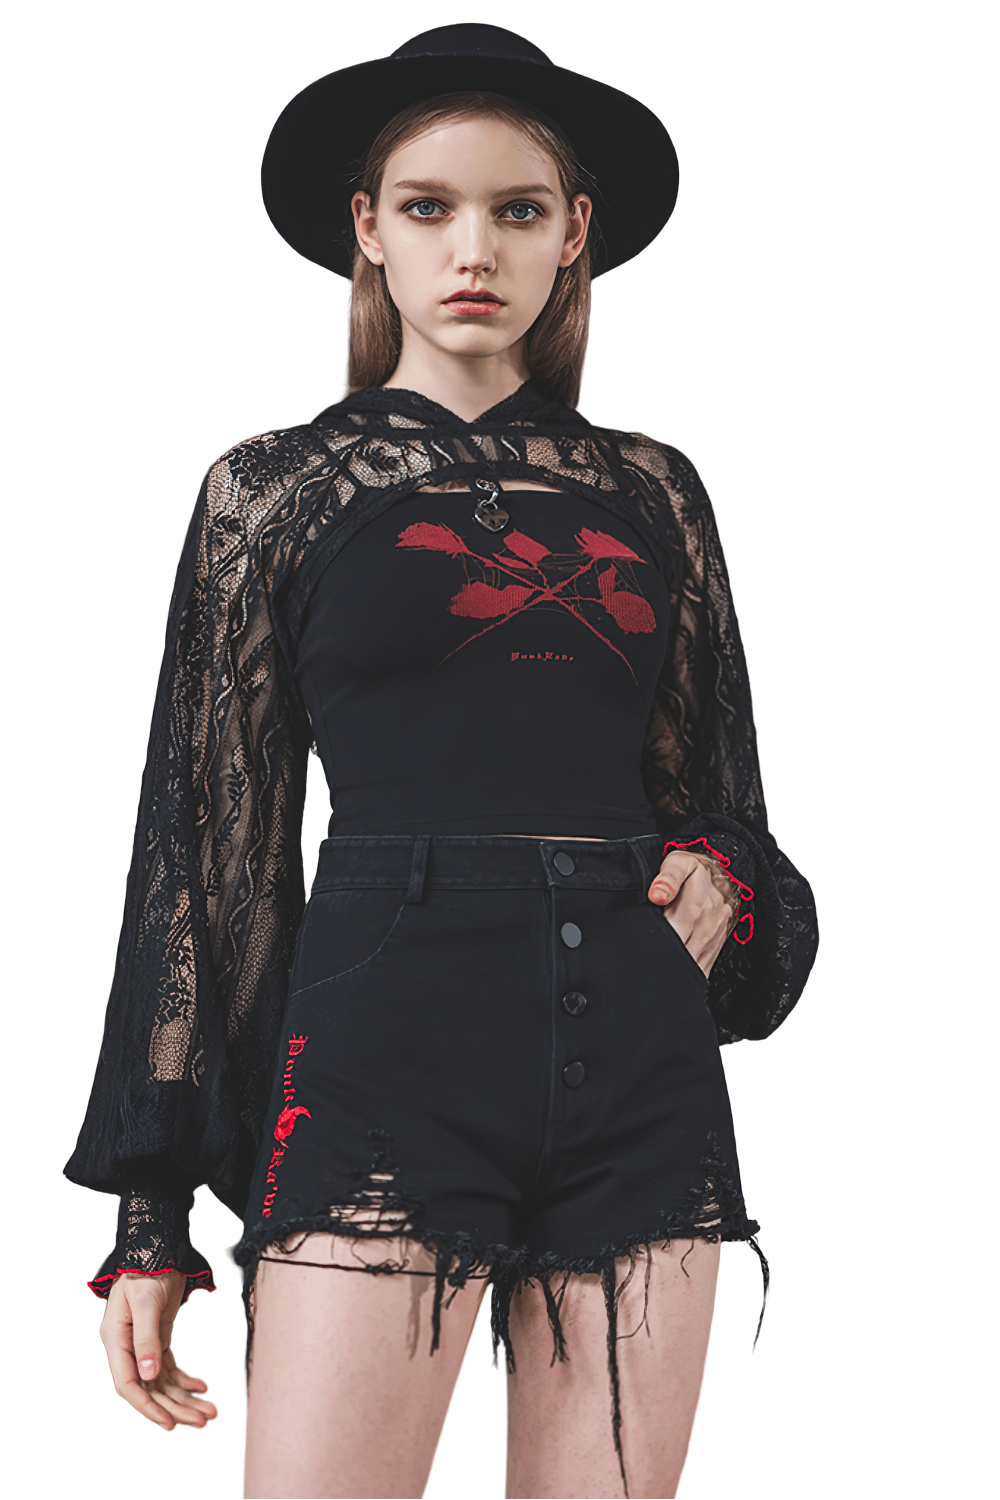 Stylish Short Black Lace Hooded Crop Top with Heart